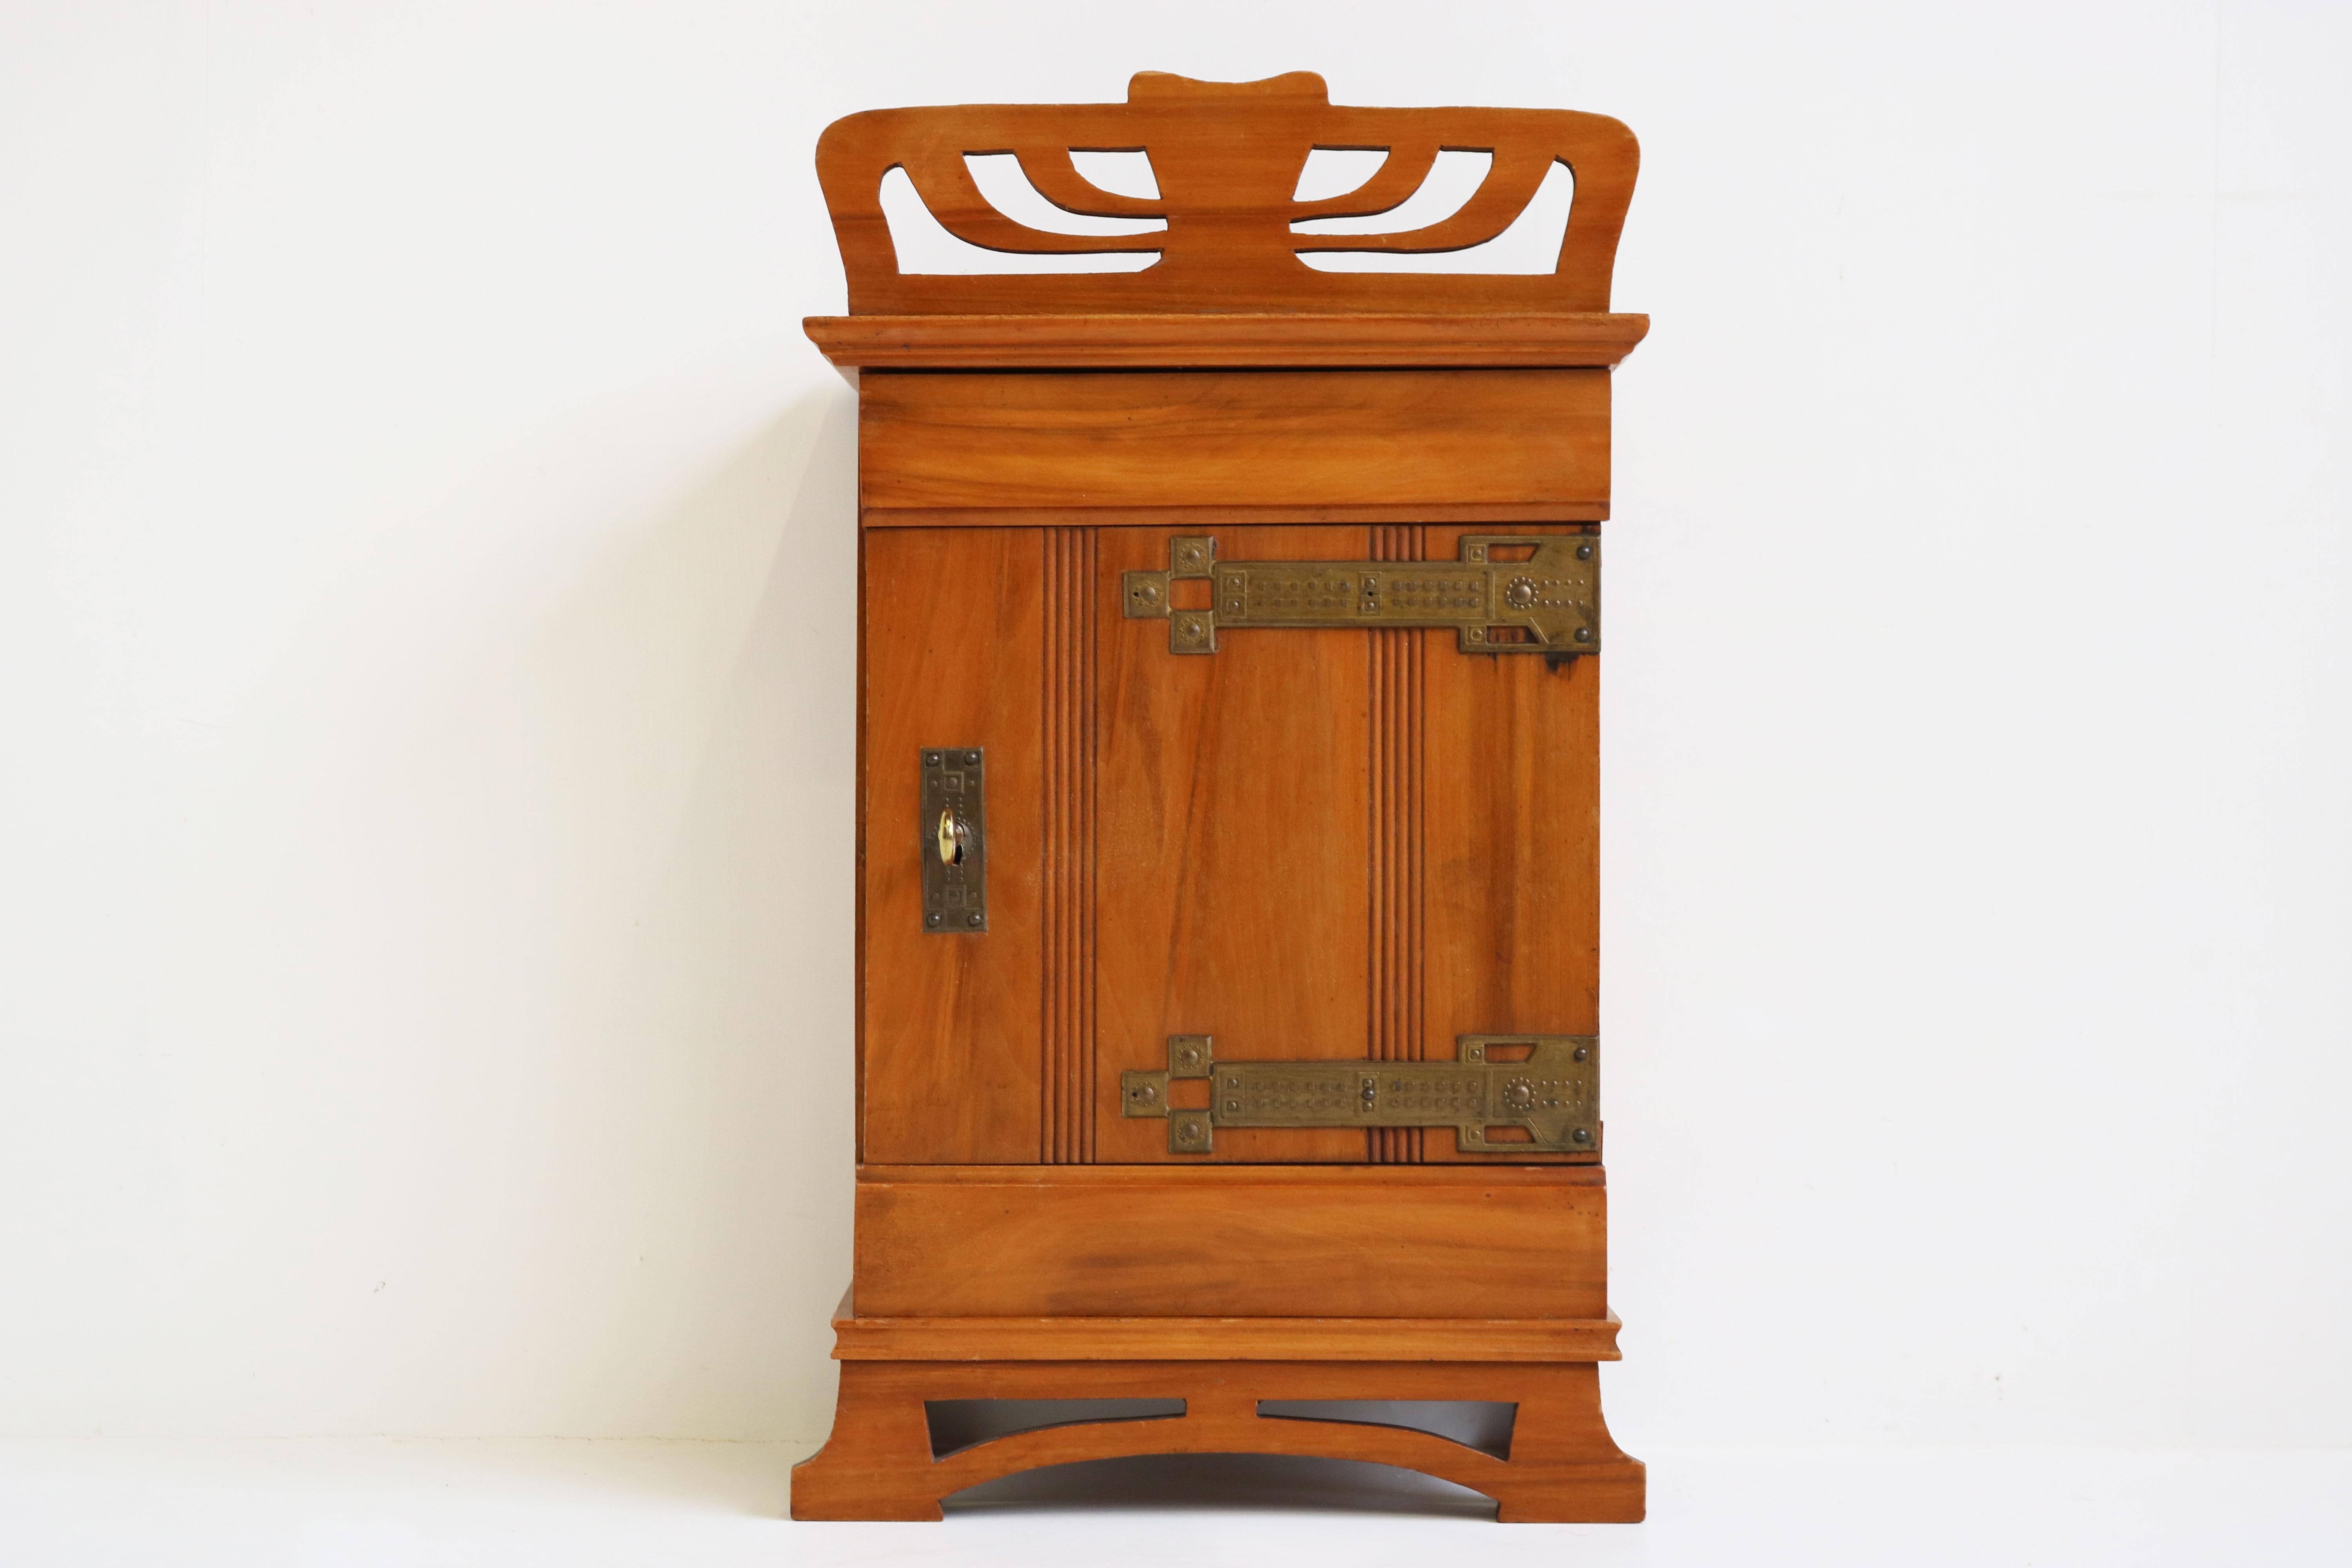 Gorgeous Dutch antique Art Nouveau wall cabinet from the 1910s. 
Gorgeous Art nouveau lines in solid wood with high quality brass decorations. (these could be considered Arts & crafts design style) 
The wall cabinet comes with a working lock and